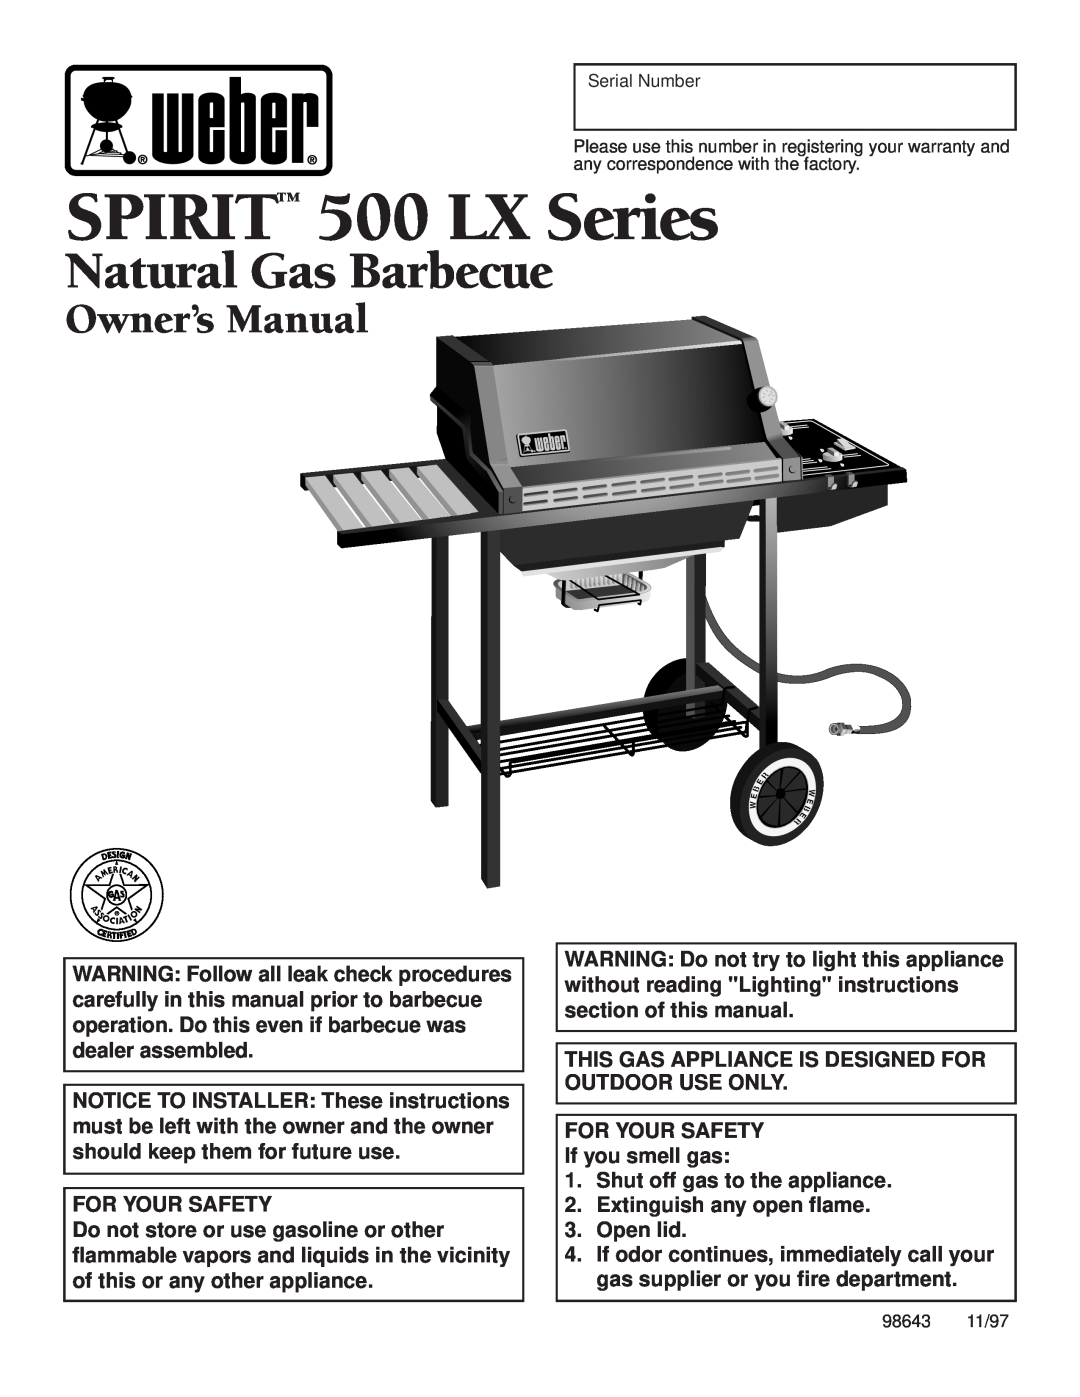 Weber owner manual Natural Gas Barbecue, SPIRIT 500 LX Series, For Your Safety, Extinguish any open flame 3. Open lid 